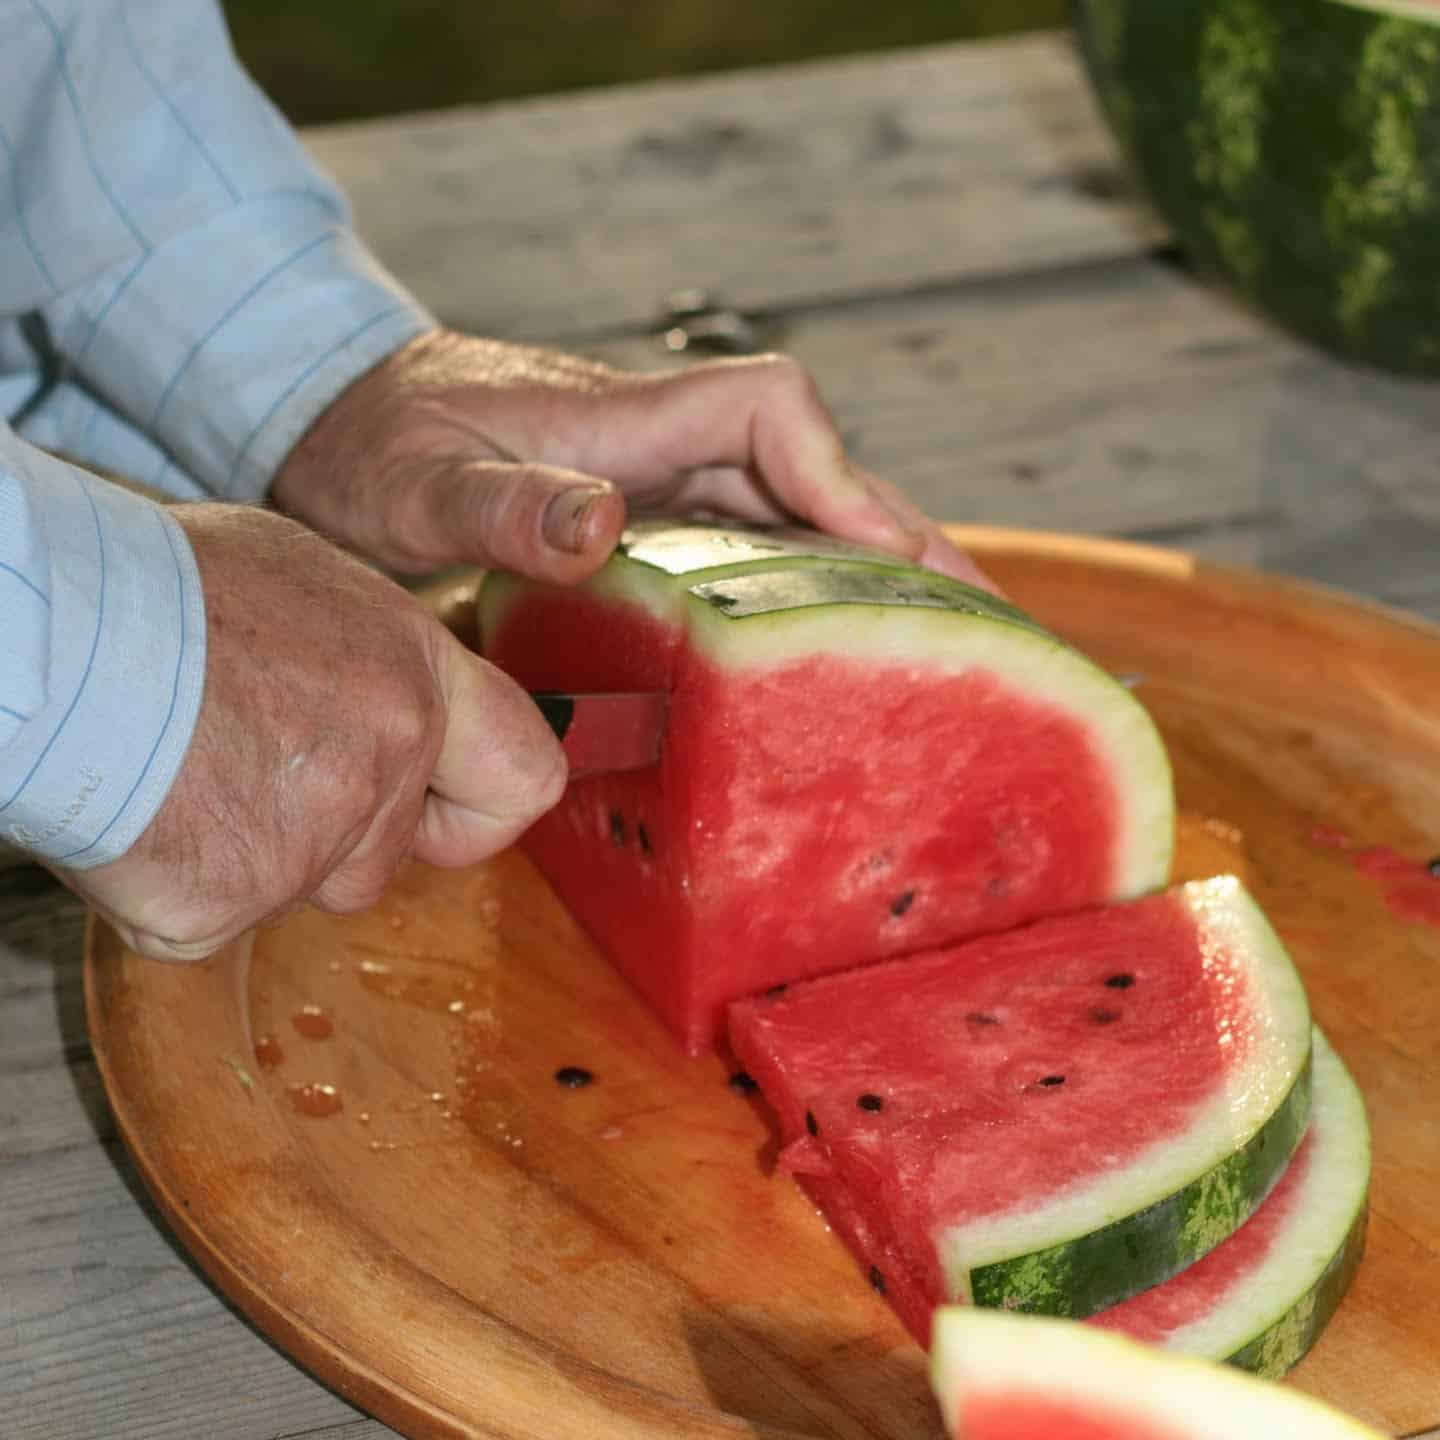 Cutting a watermelon into wedge slices